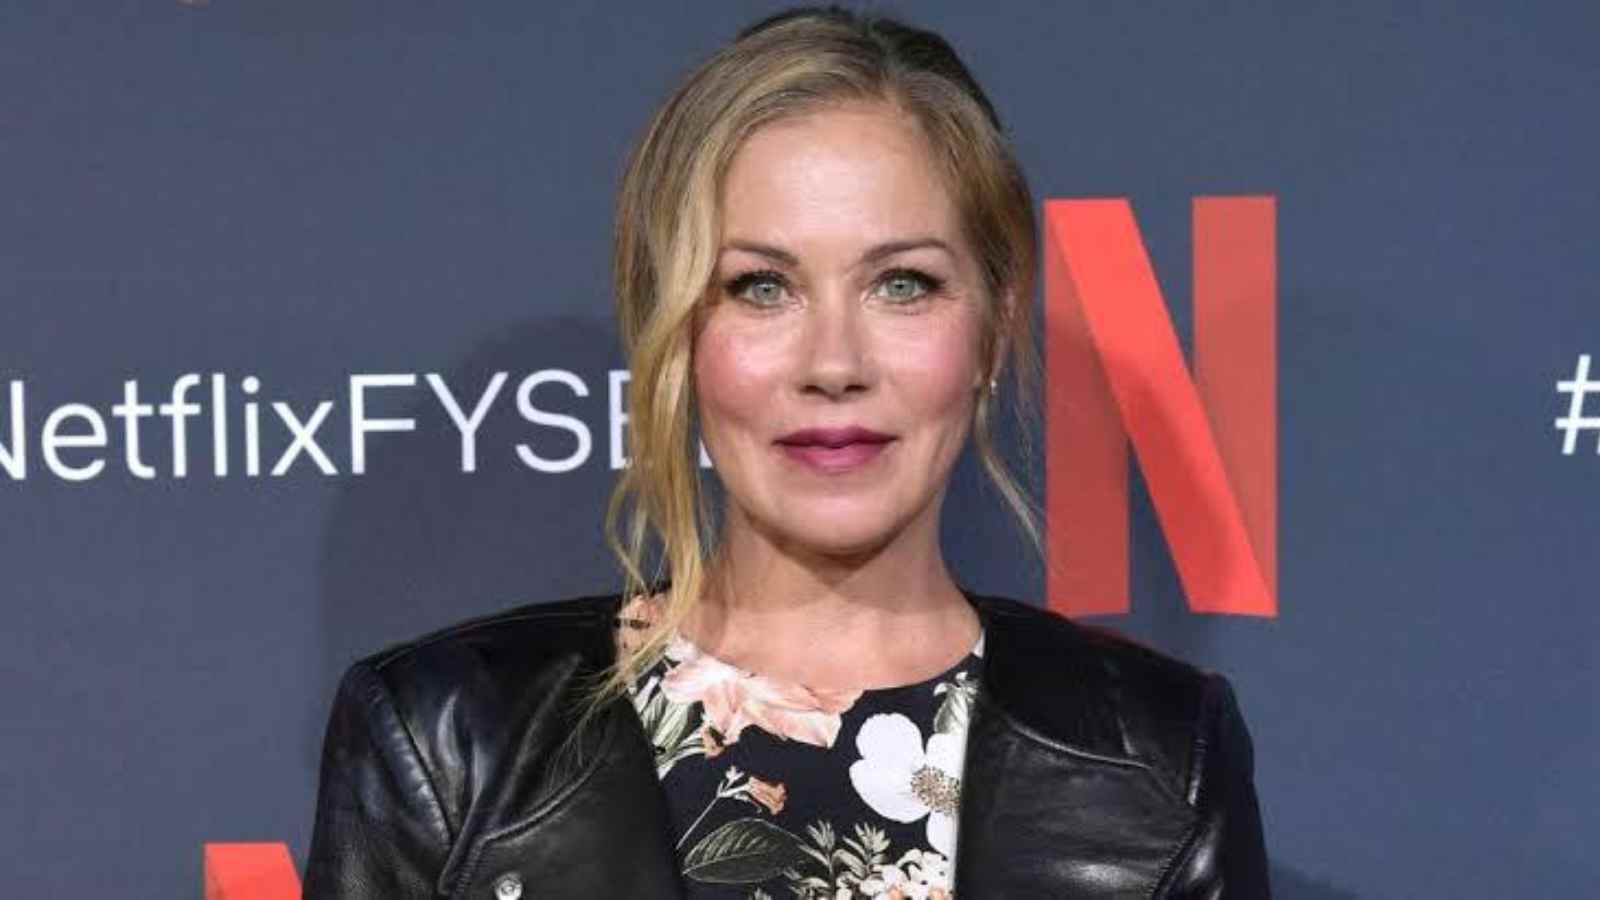 How much has Christina Applegate earn after her Netflix show, 'Dead To Me'?